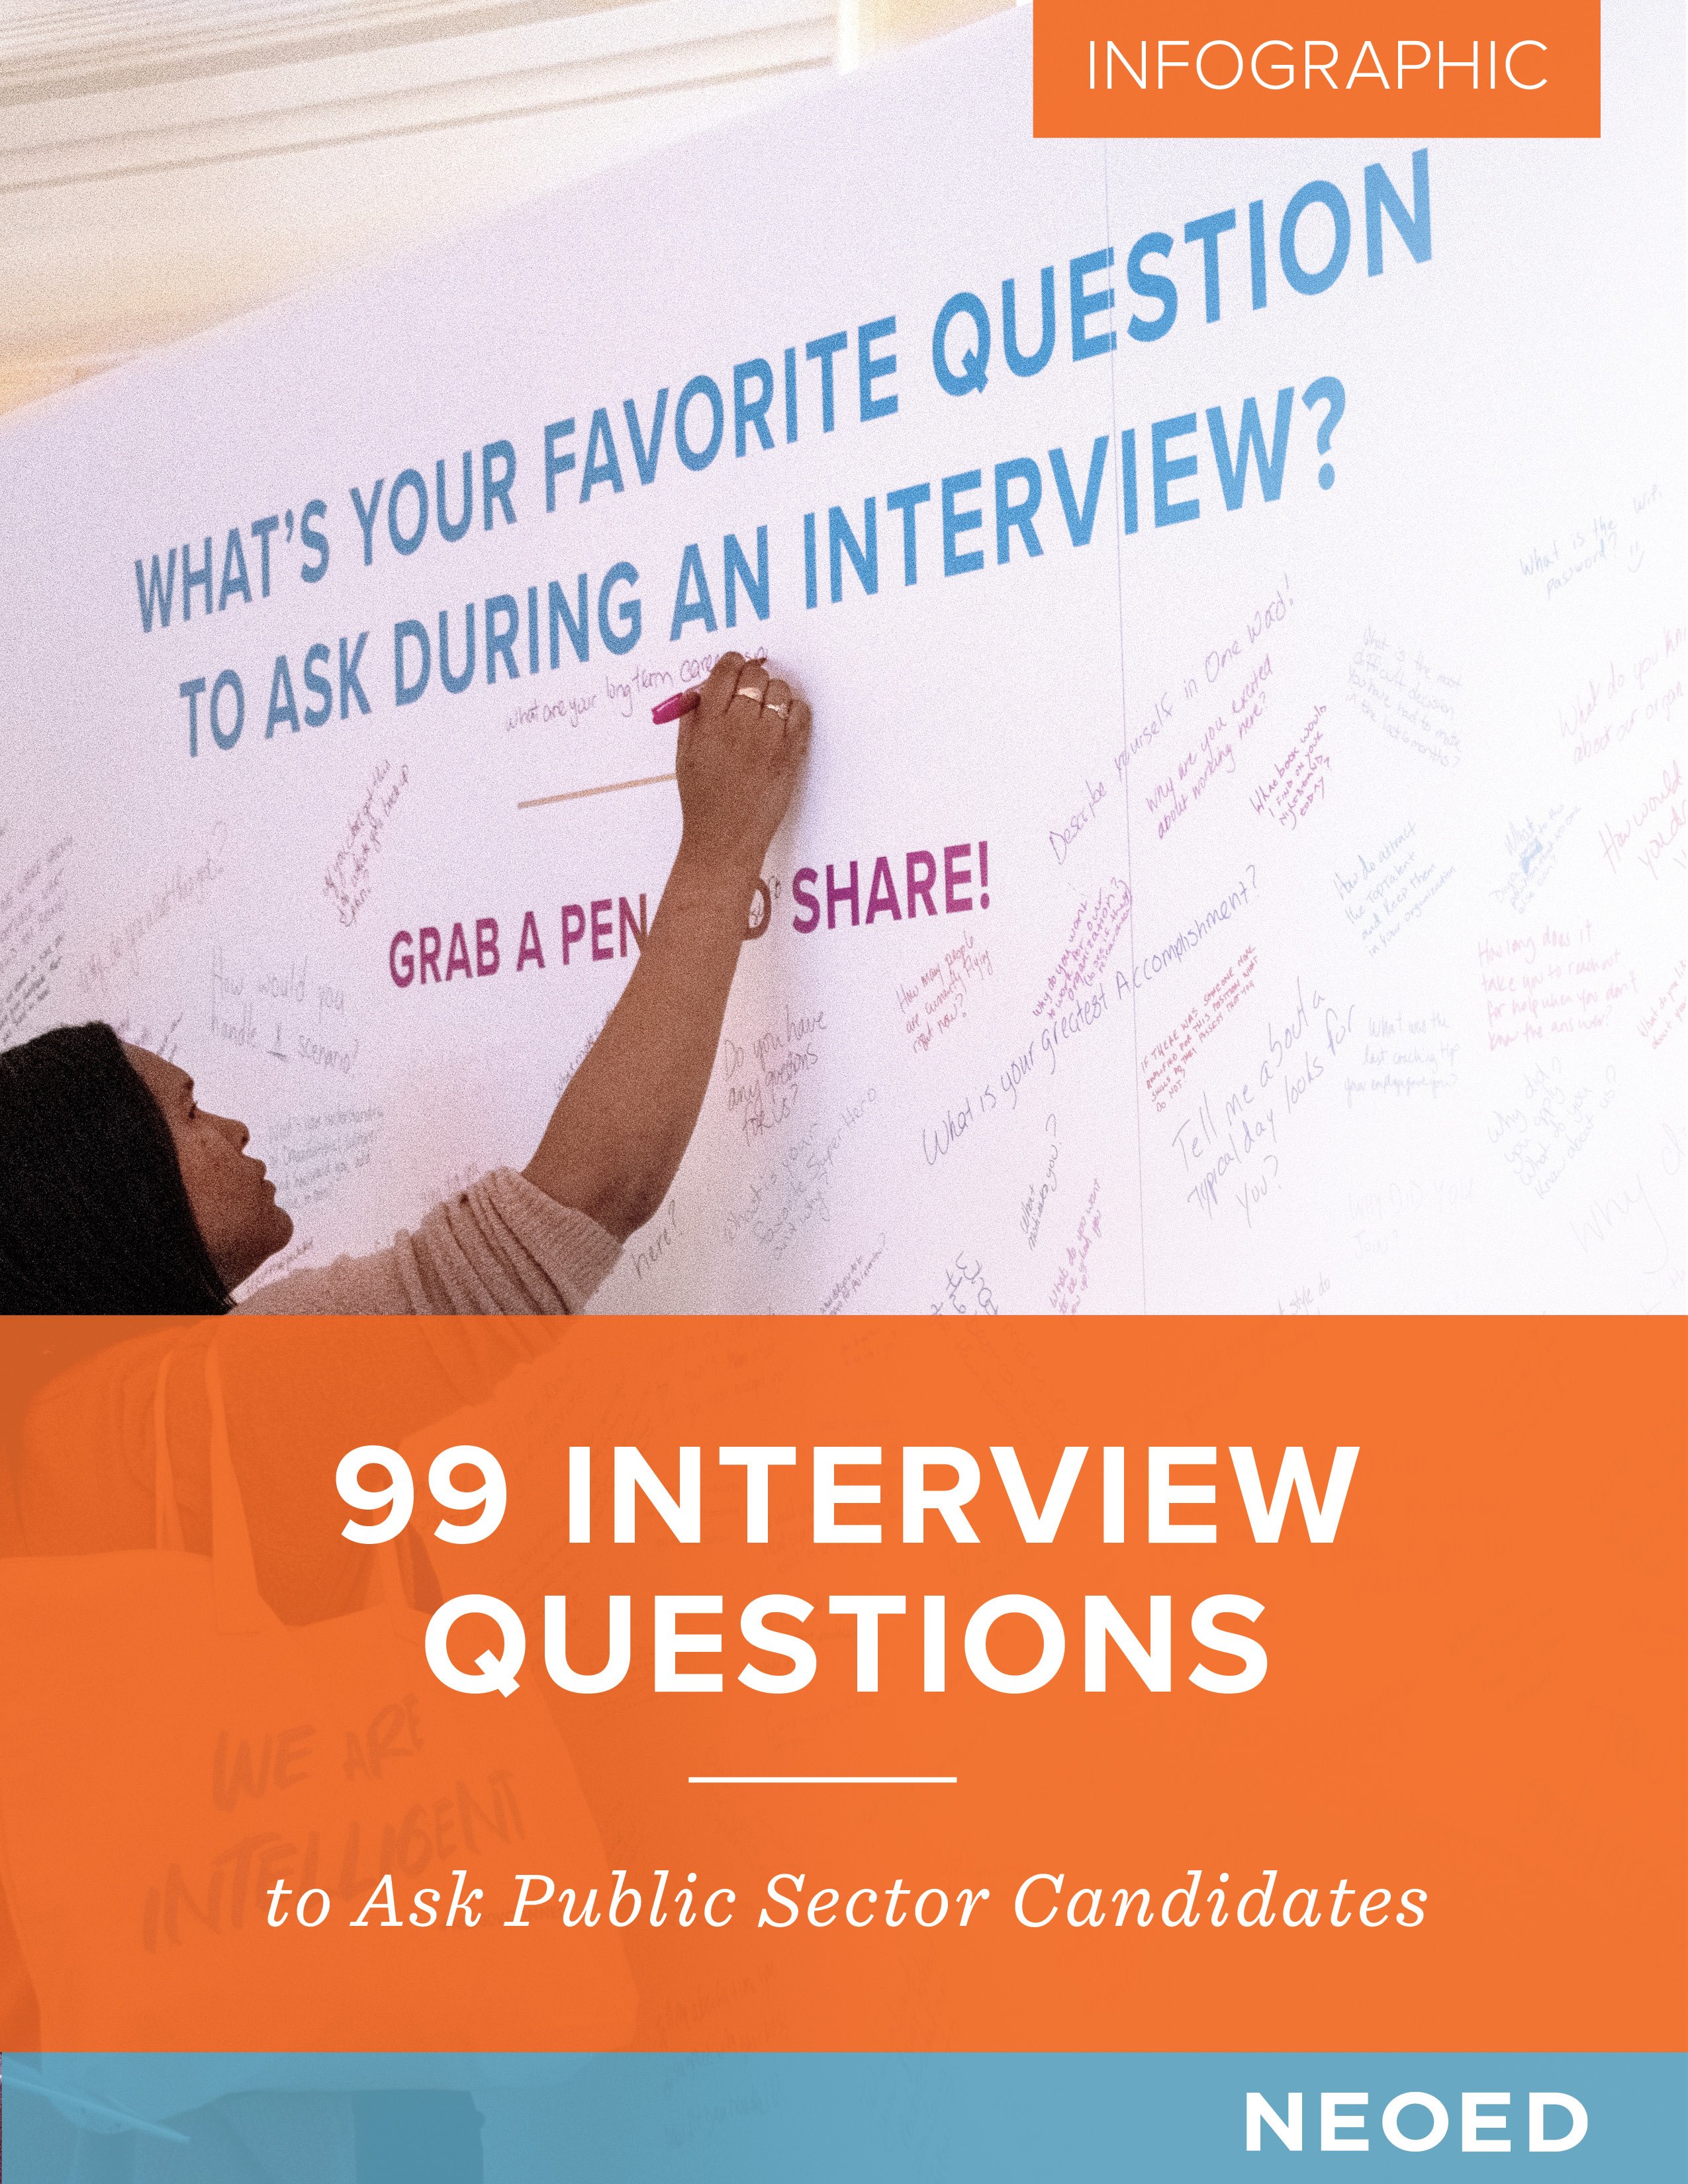 NEOED-Infographic-99-Questions-Thumbnail